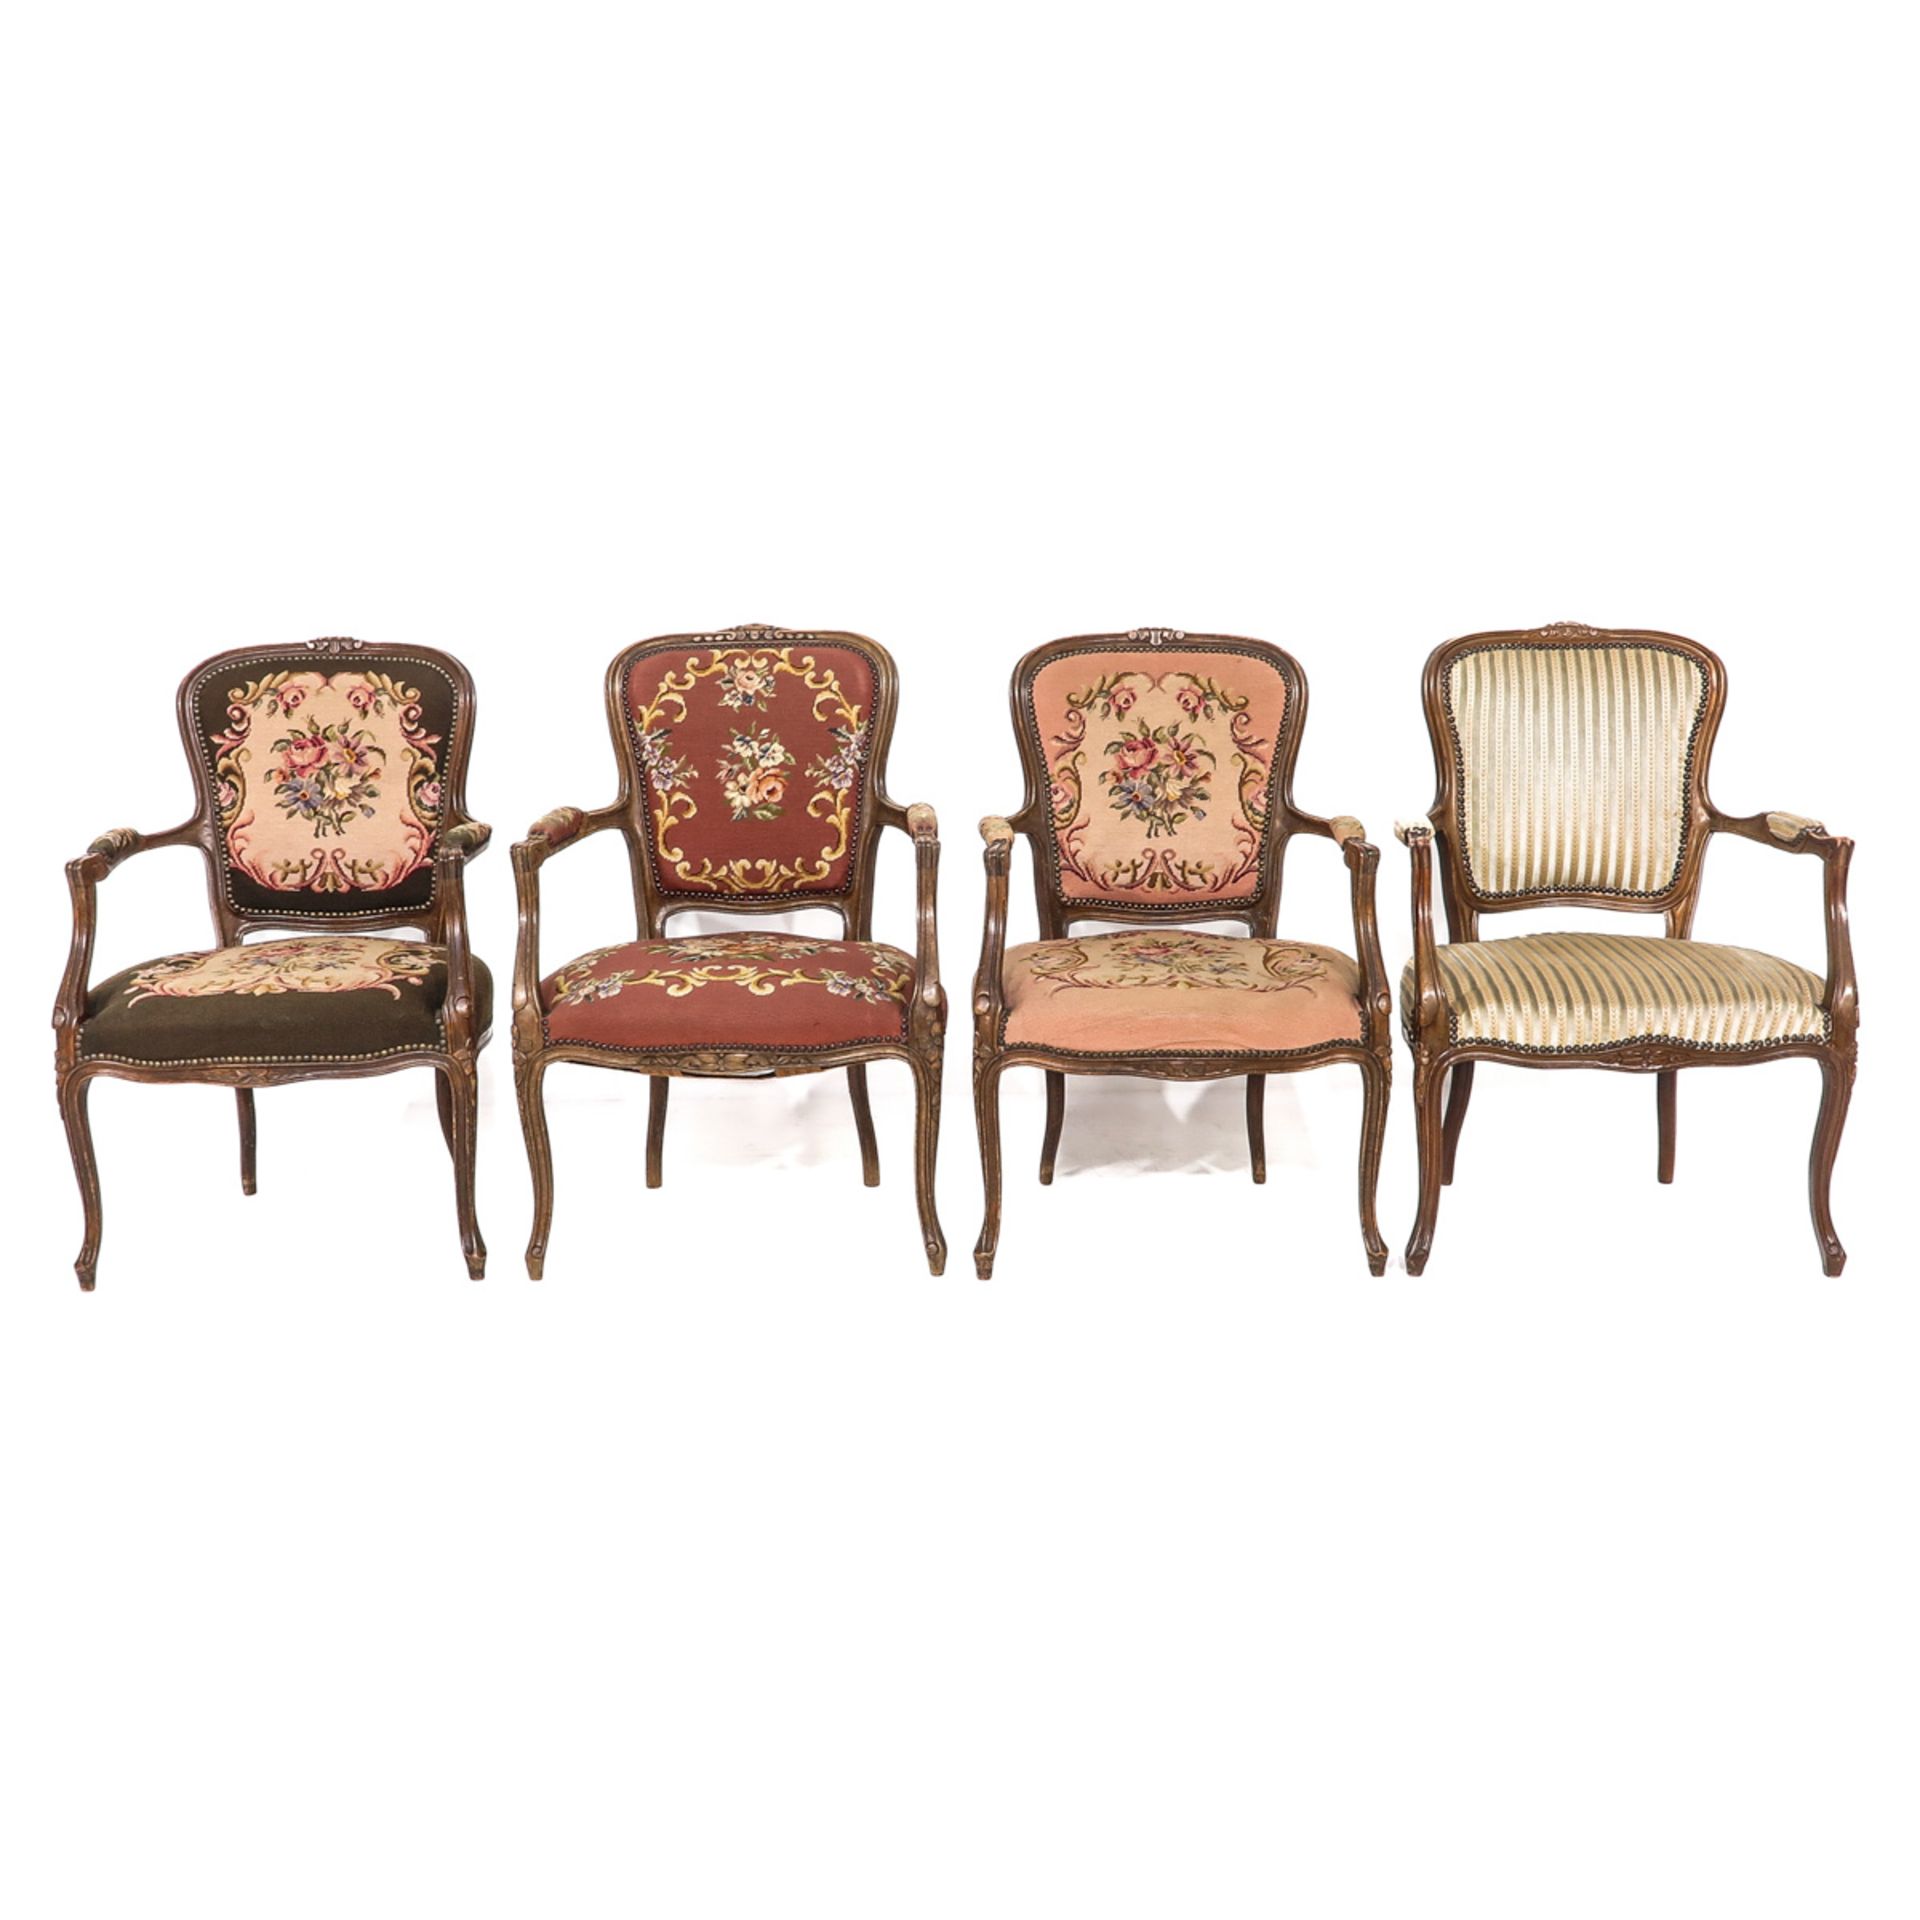 A Lot of 4 Armchairs